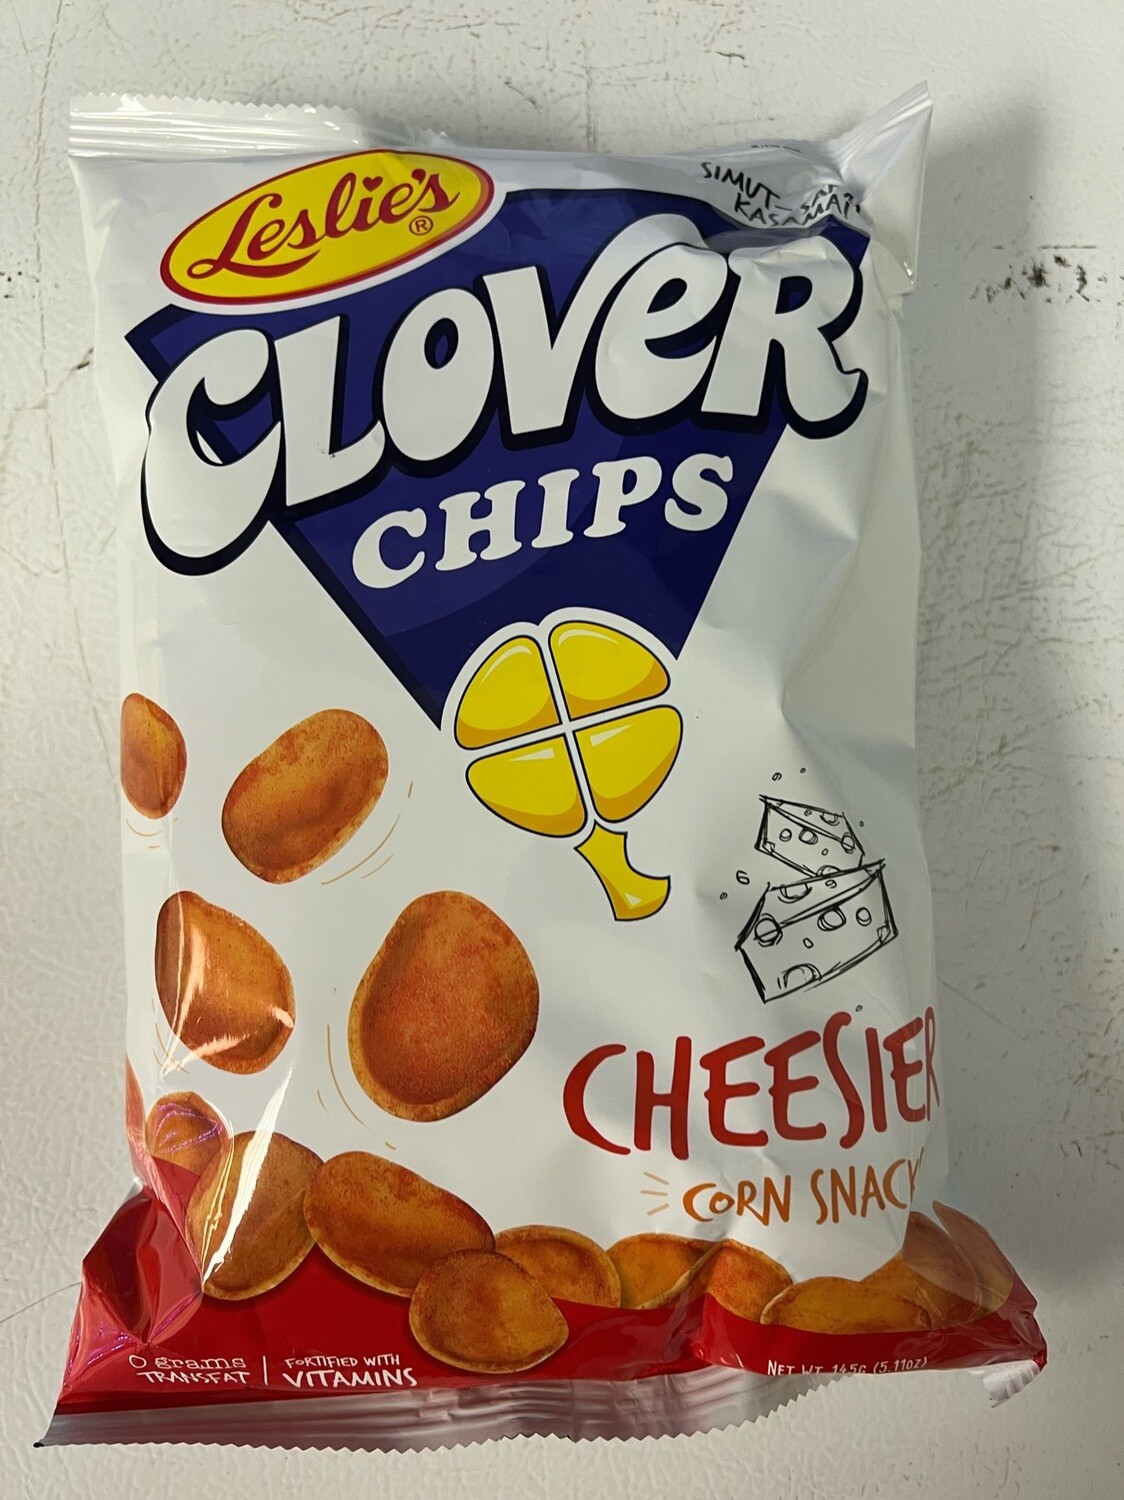 Leslie's Clover Chip Cheese Flavor